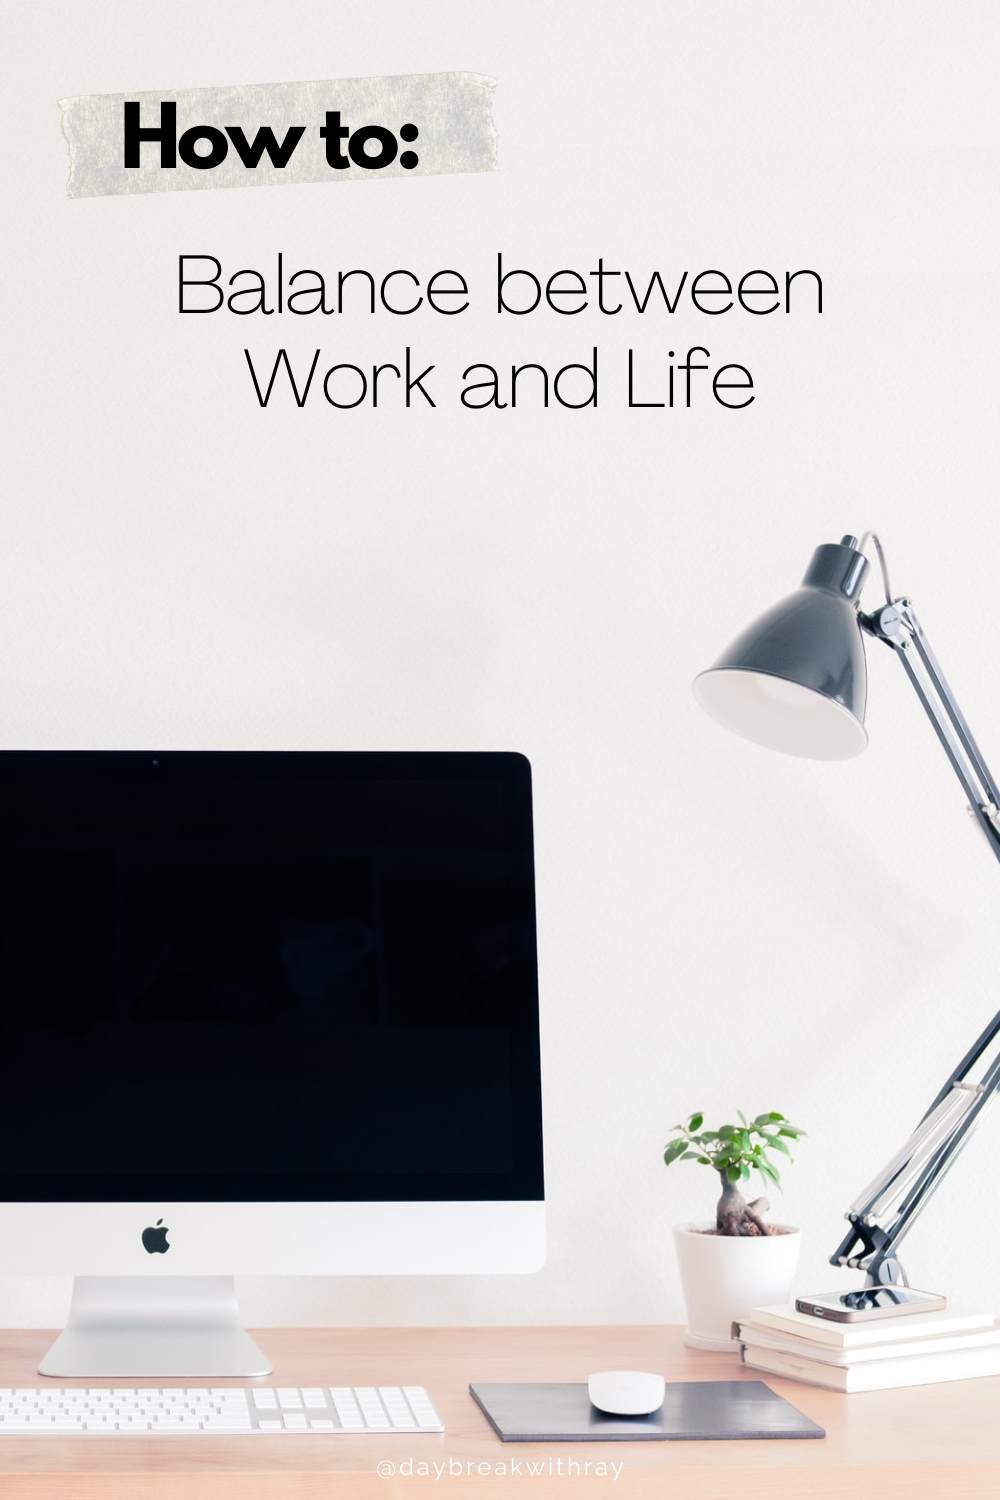 How to Balance between Work and Life